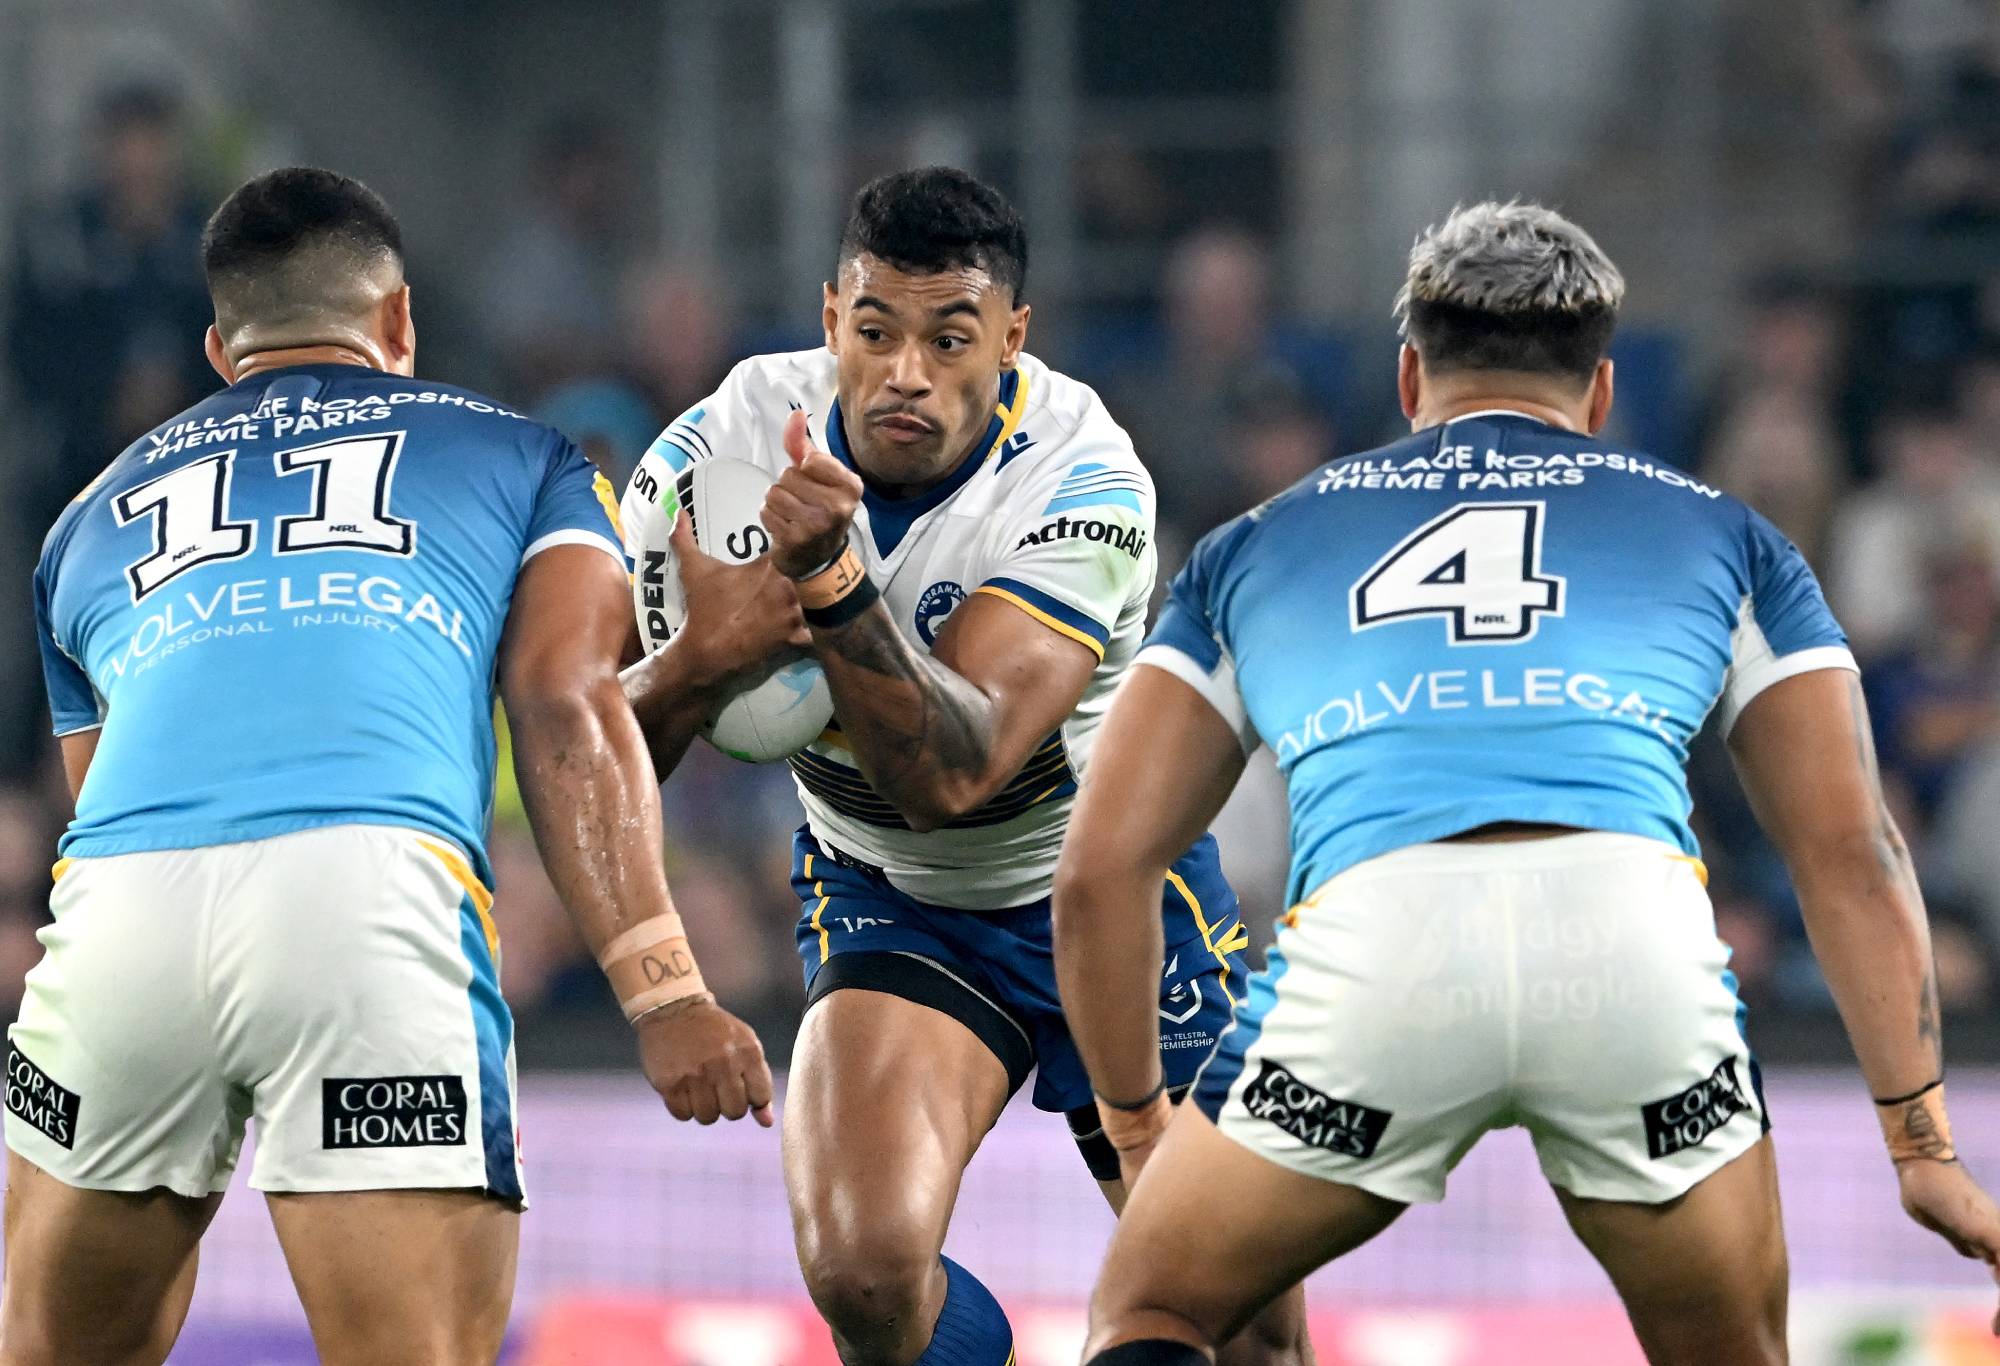 GOLD COAST, AUSTRALIA - APRIL 09: Waqa Blake of the Eels takes on the defence during the round five NRL match between the Gold Coast Titans and the Parramatta Eels at Cbus Super Stadium, on April 09 2022, in Gold Coast, Australia. (Photo by Bradley Kanaris/Getty Images)